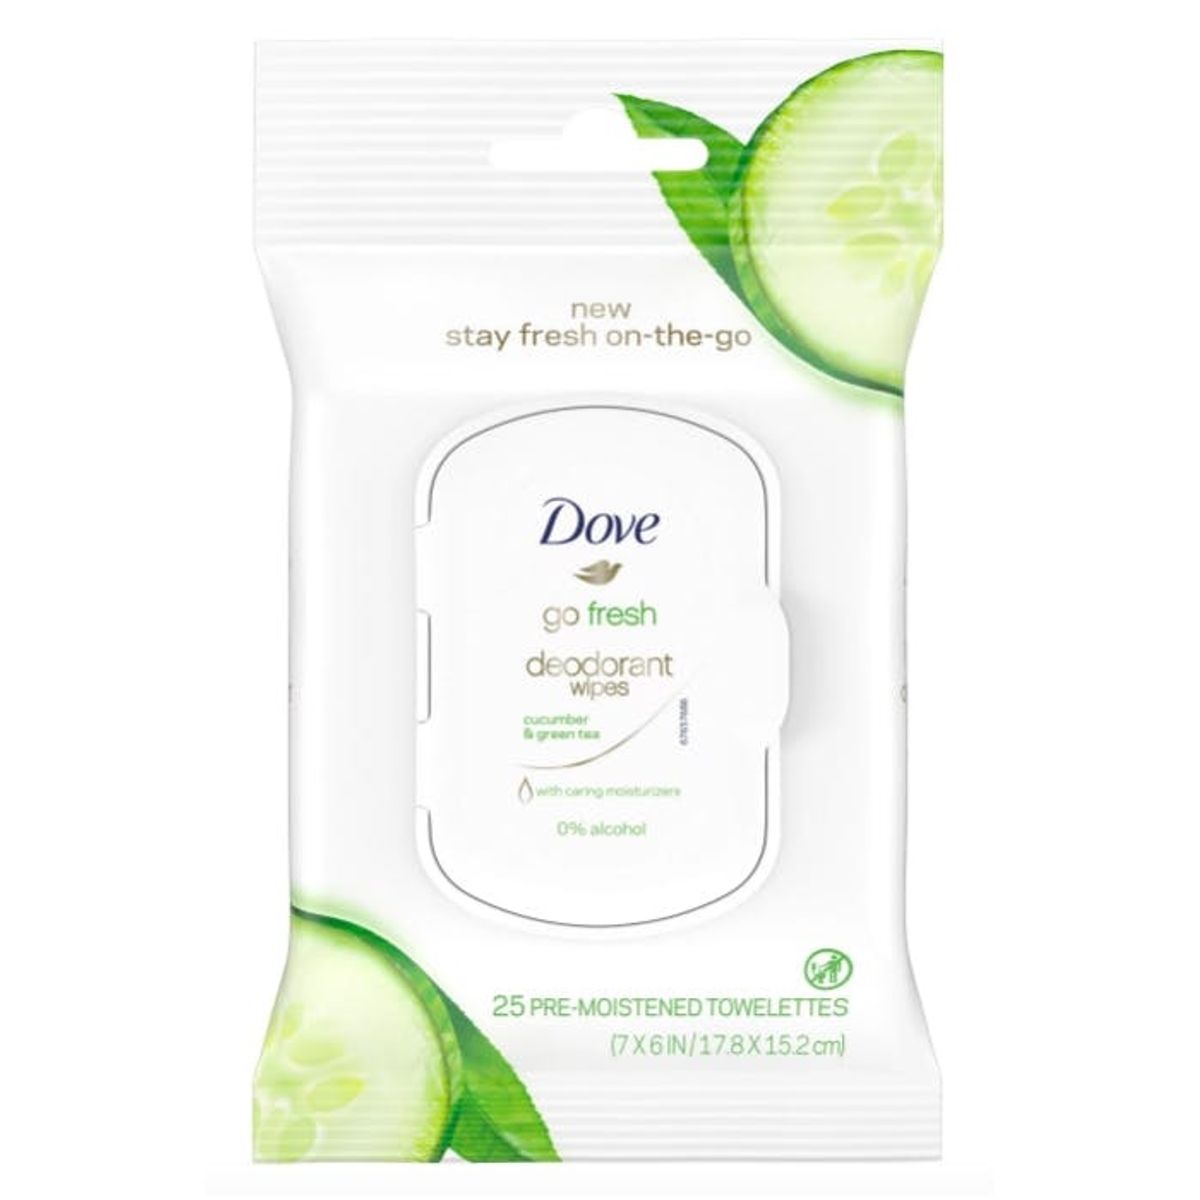 Deodorant Body Wipes Are the Mid-Day Refresh We Didn’t Know We Needed